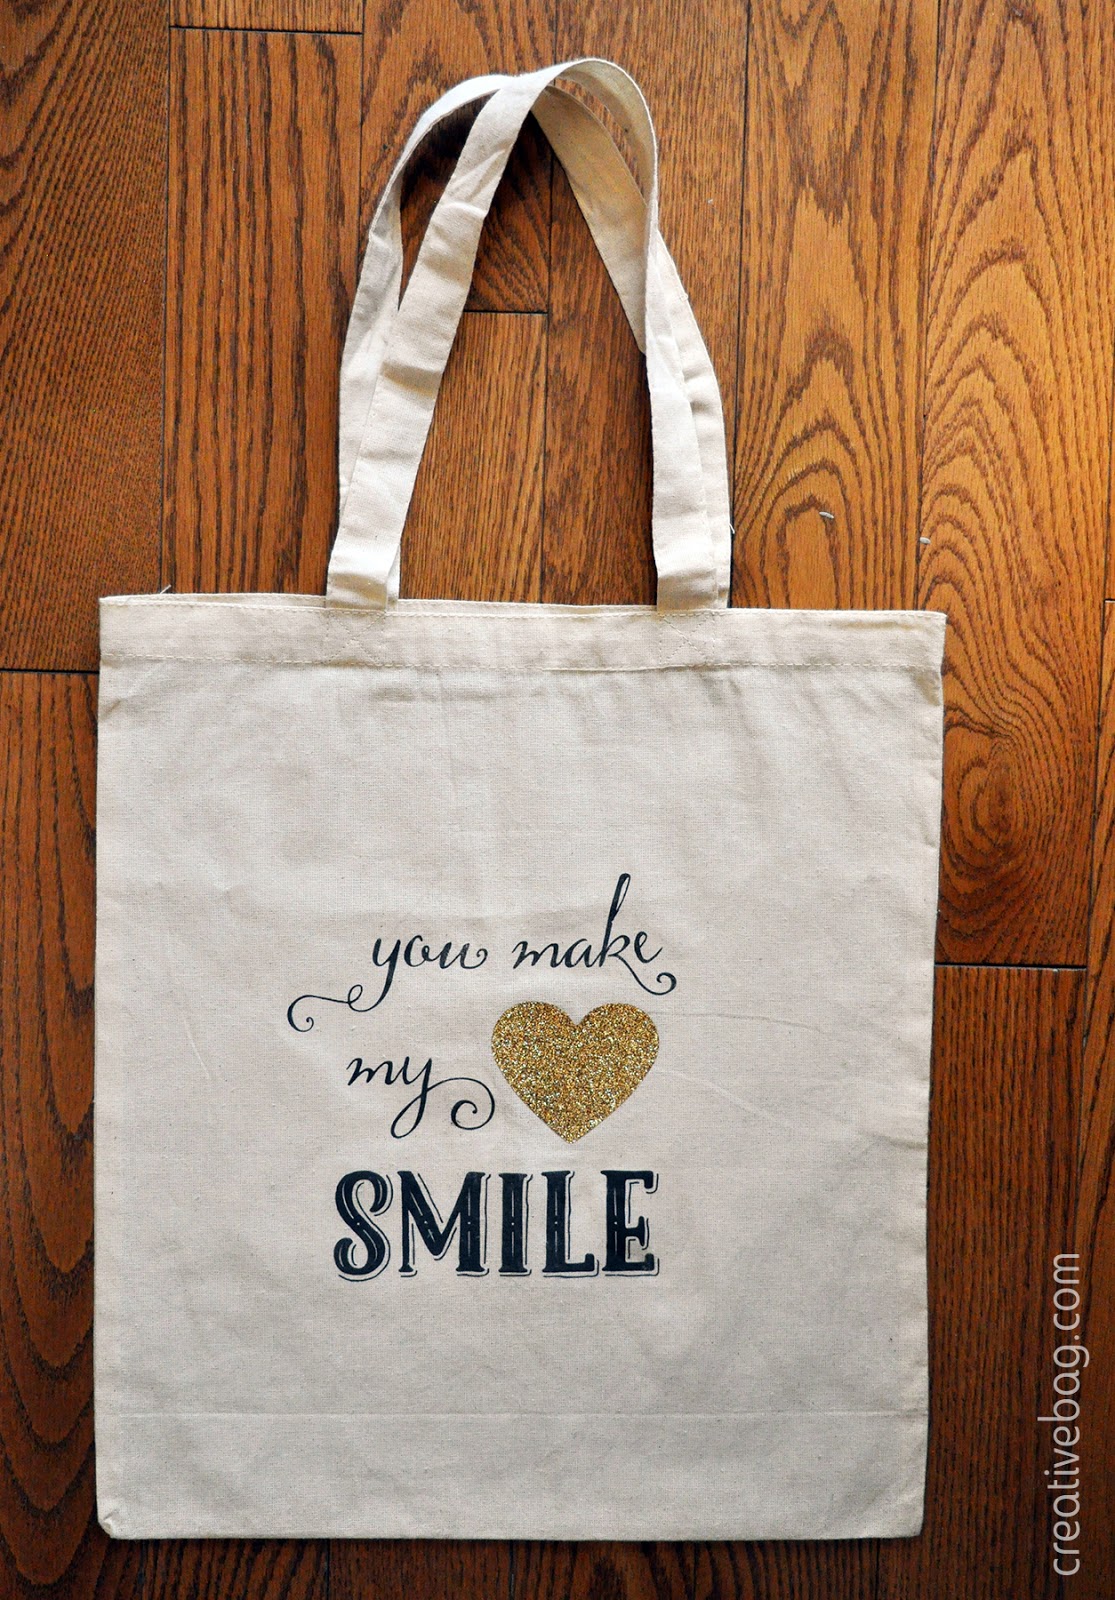 you can do it yourself - customize tote bags | Creative Bag